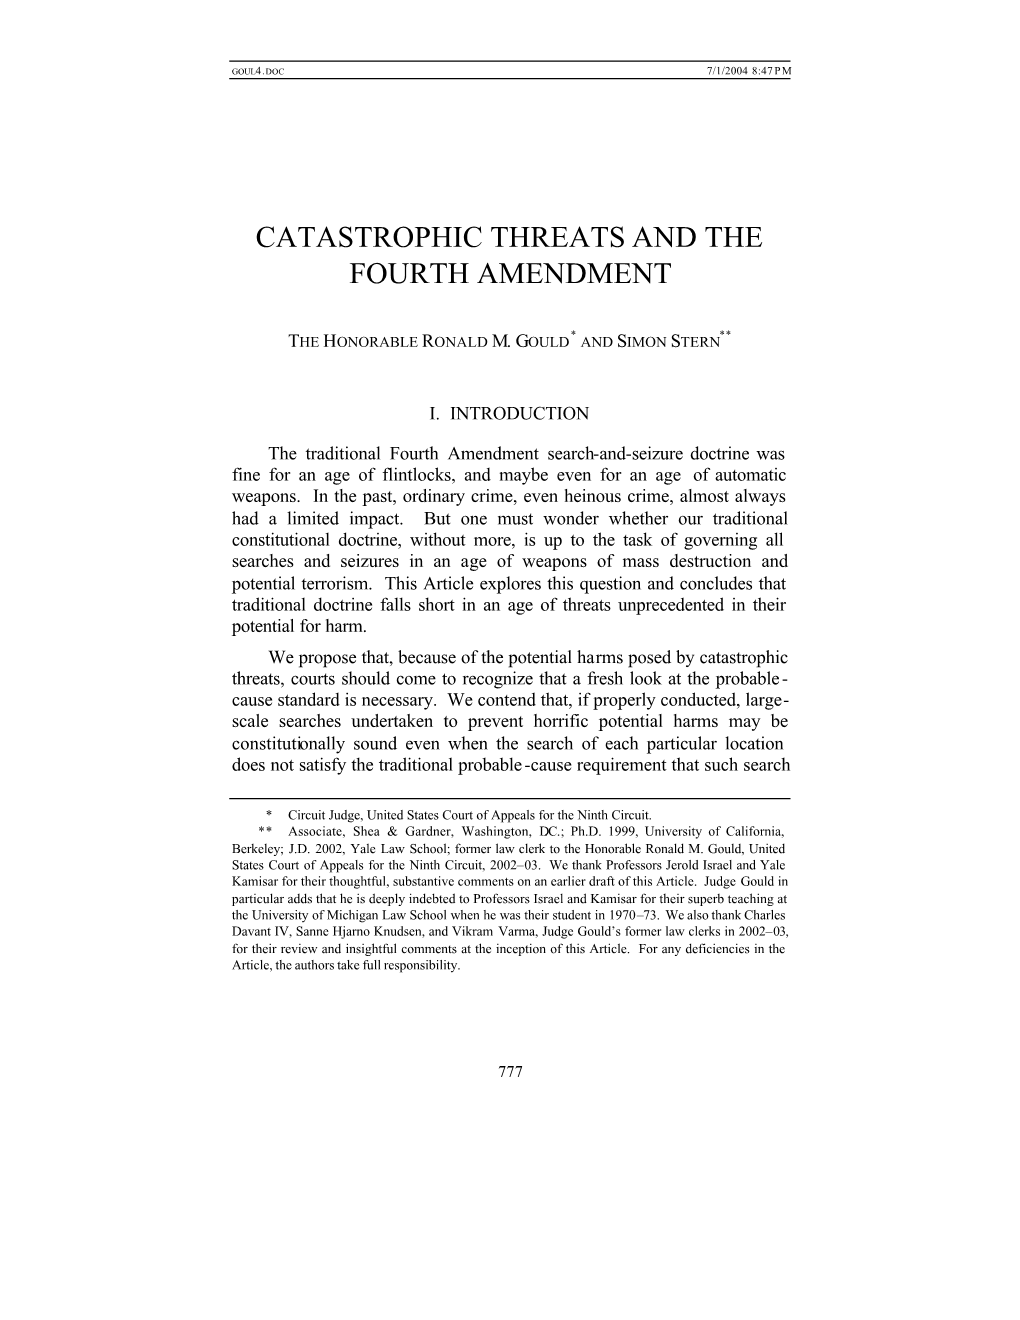 Catastrophic Threats and the Fourth Amendment